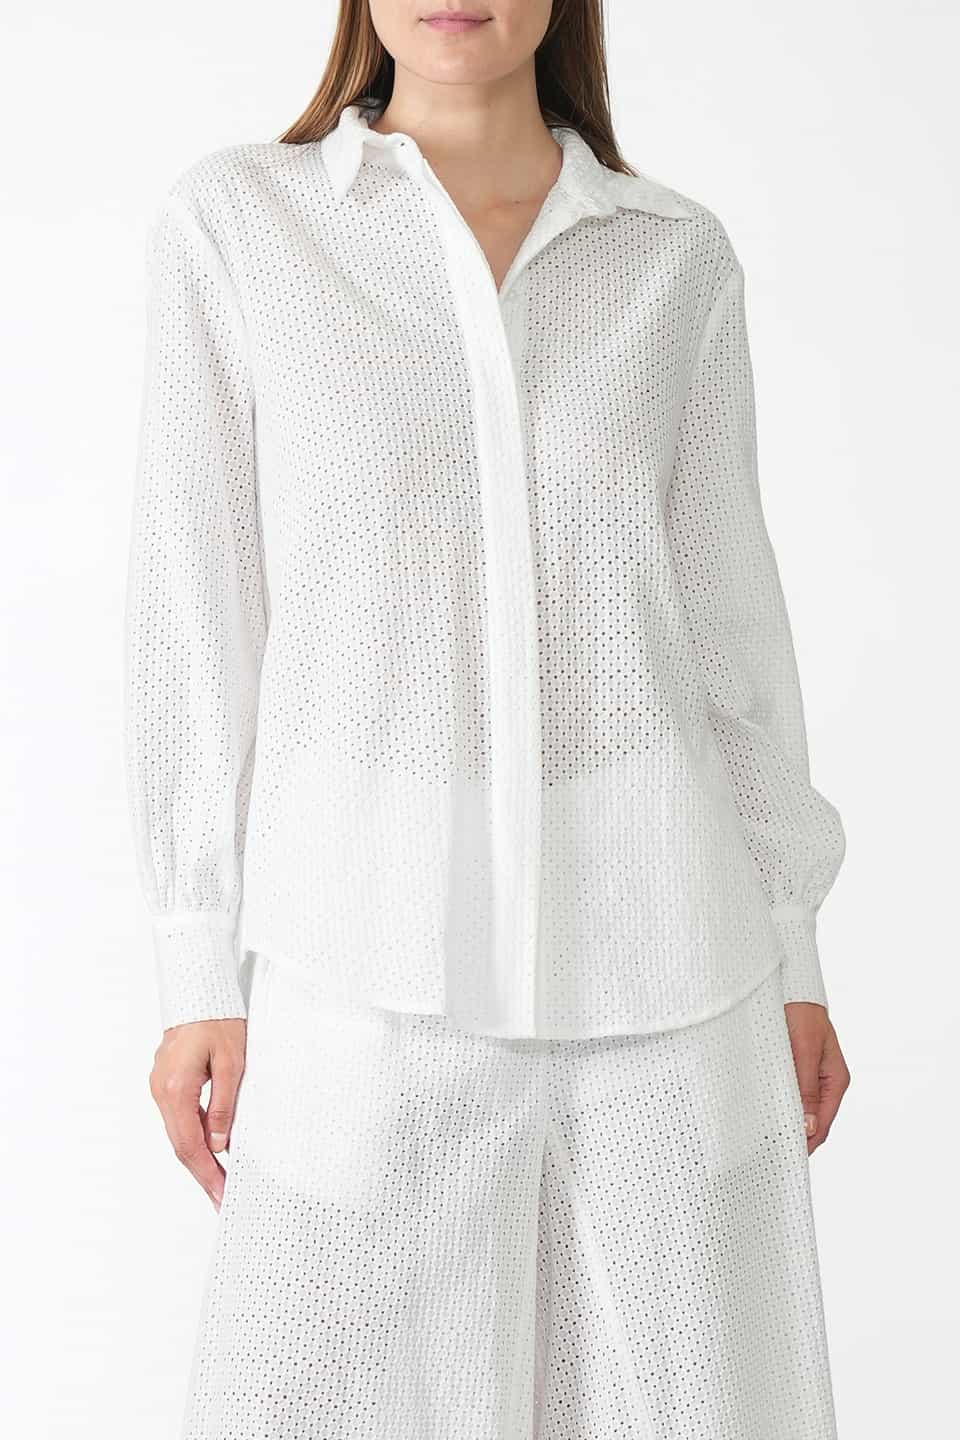 Shop online trendy White Women long sleeve from Federica Tosi Fashion designer. Product gallery 1